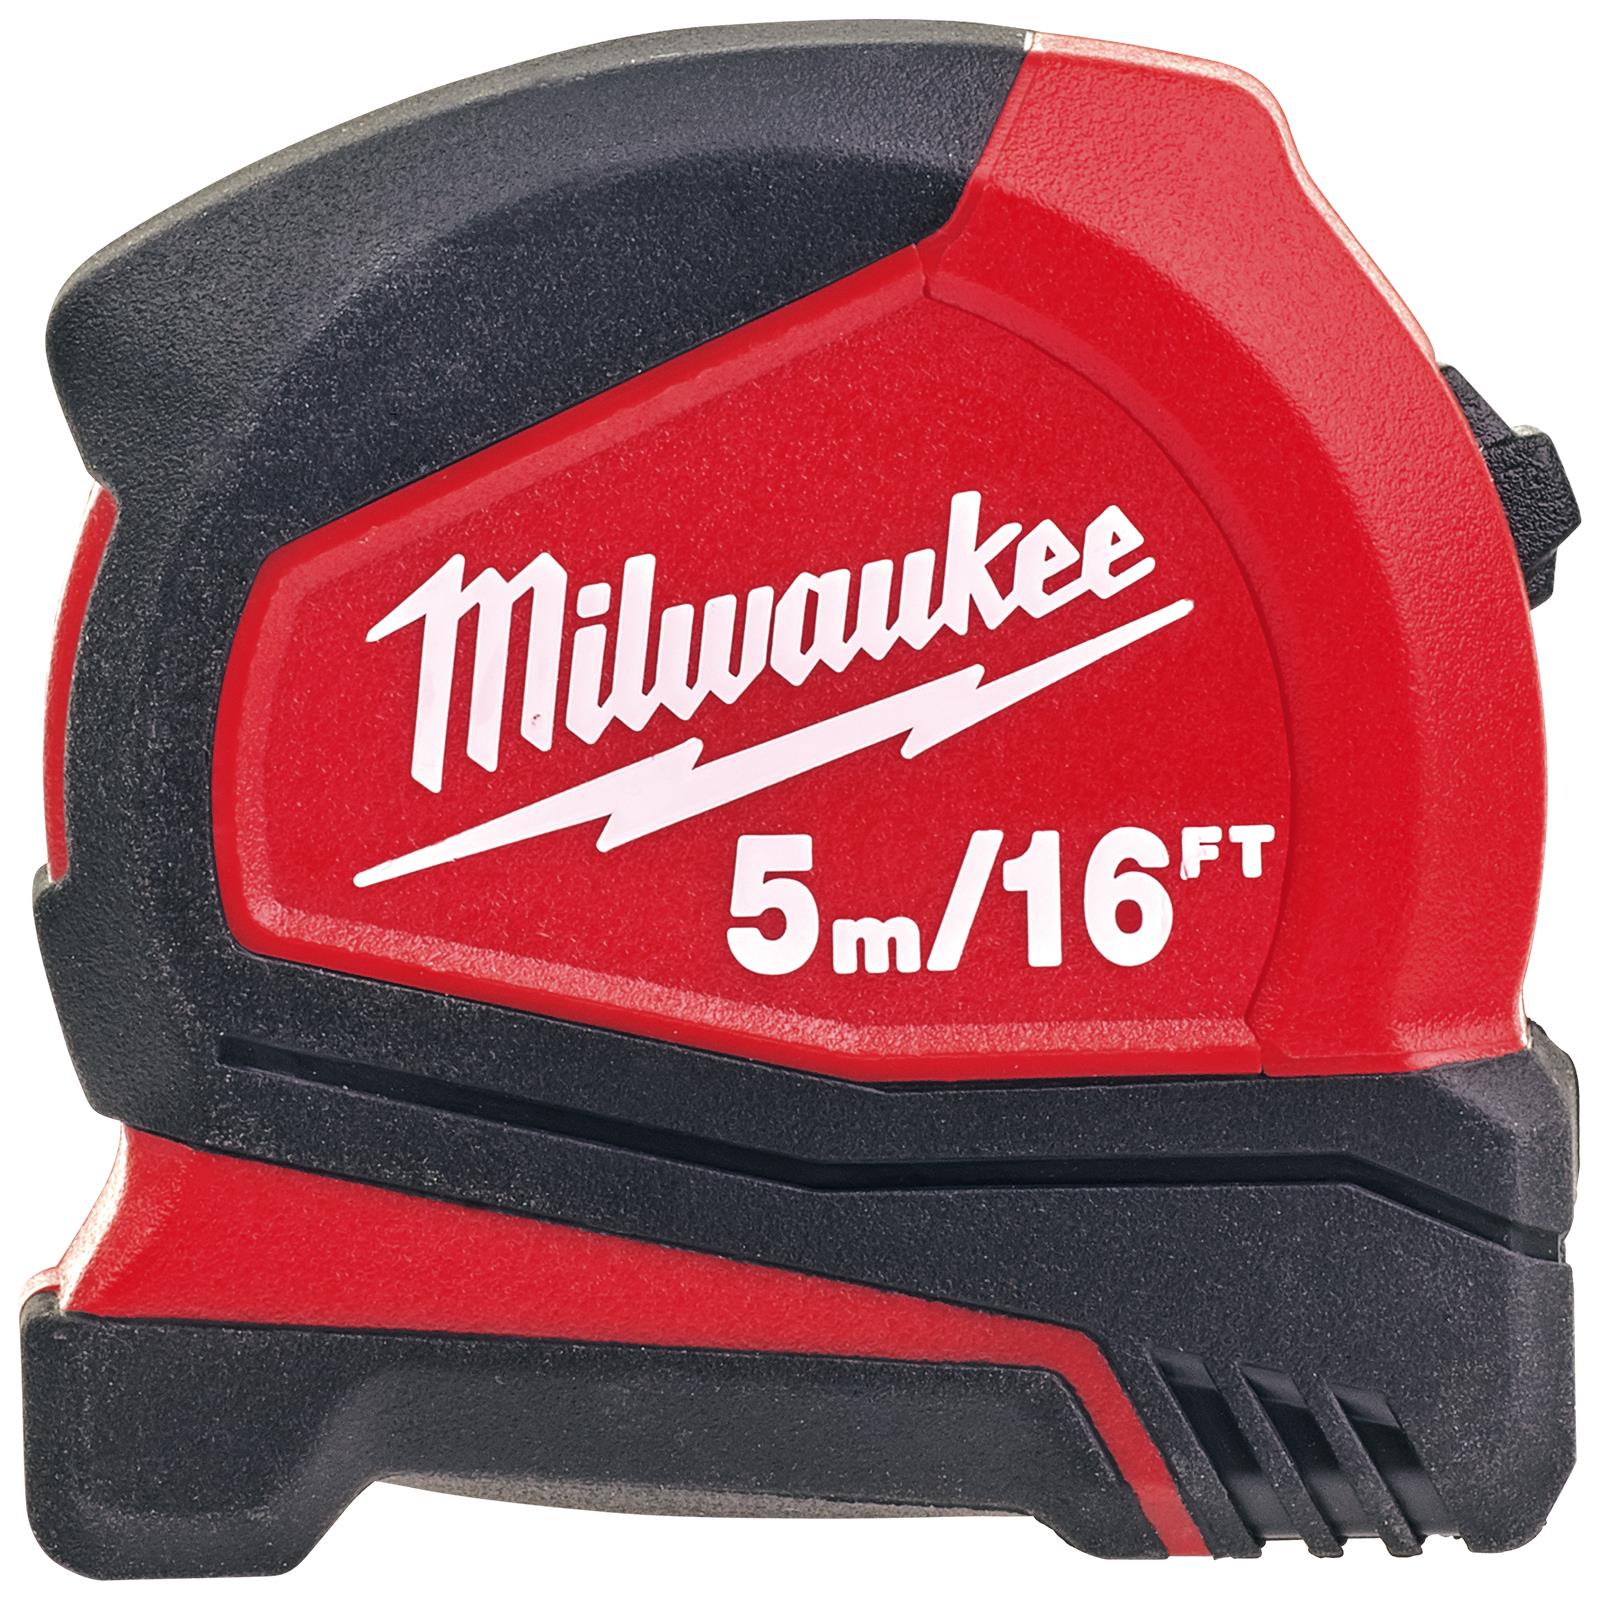 Milwaukee Tape Measure 5m 16ft Metric Imperial Pro Compact Pocket Tape 25mm Blade Width